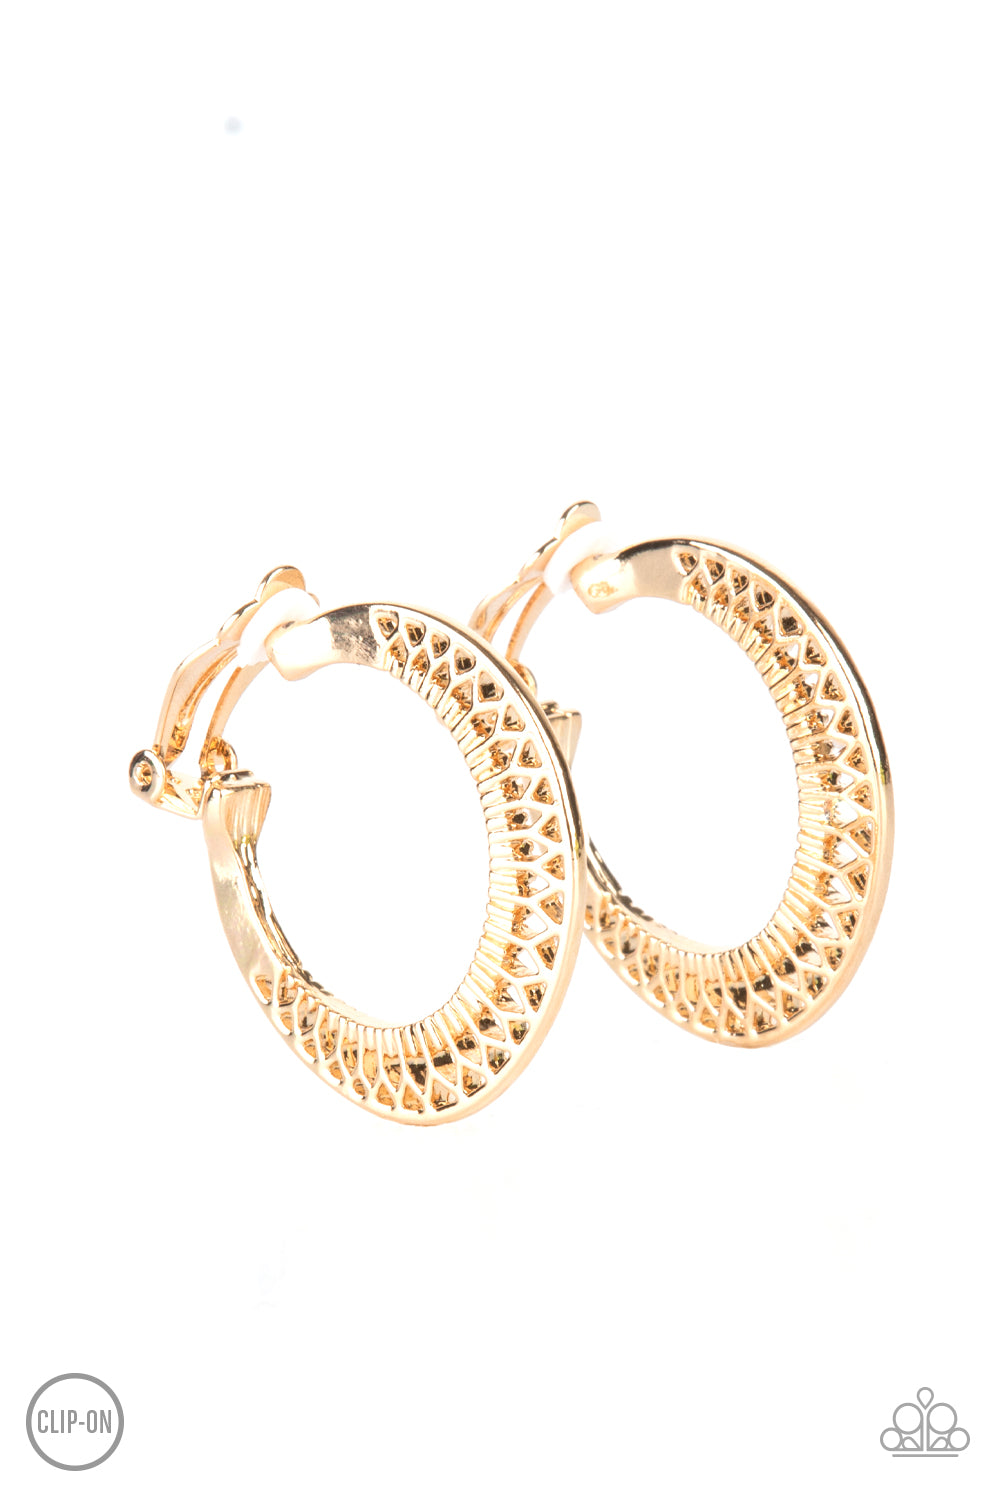 Moon Child Charisma Gold Clip-On Earring - Paparazzi Accessories  Stenciled in a petal-like texture, a gold frame delicately curves into a floral patterned hoop. Earring attaches to a standard clip-on fitting.  Sold as one pair of clip-on earrings.